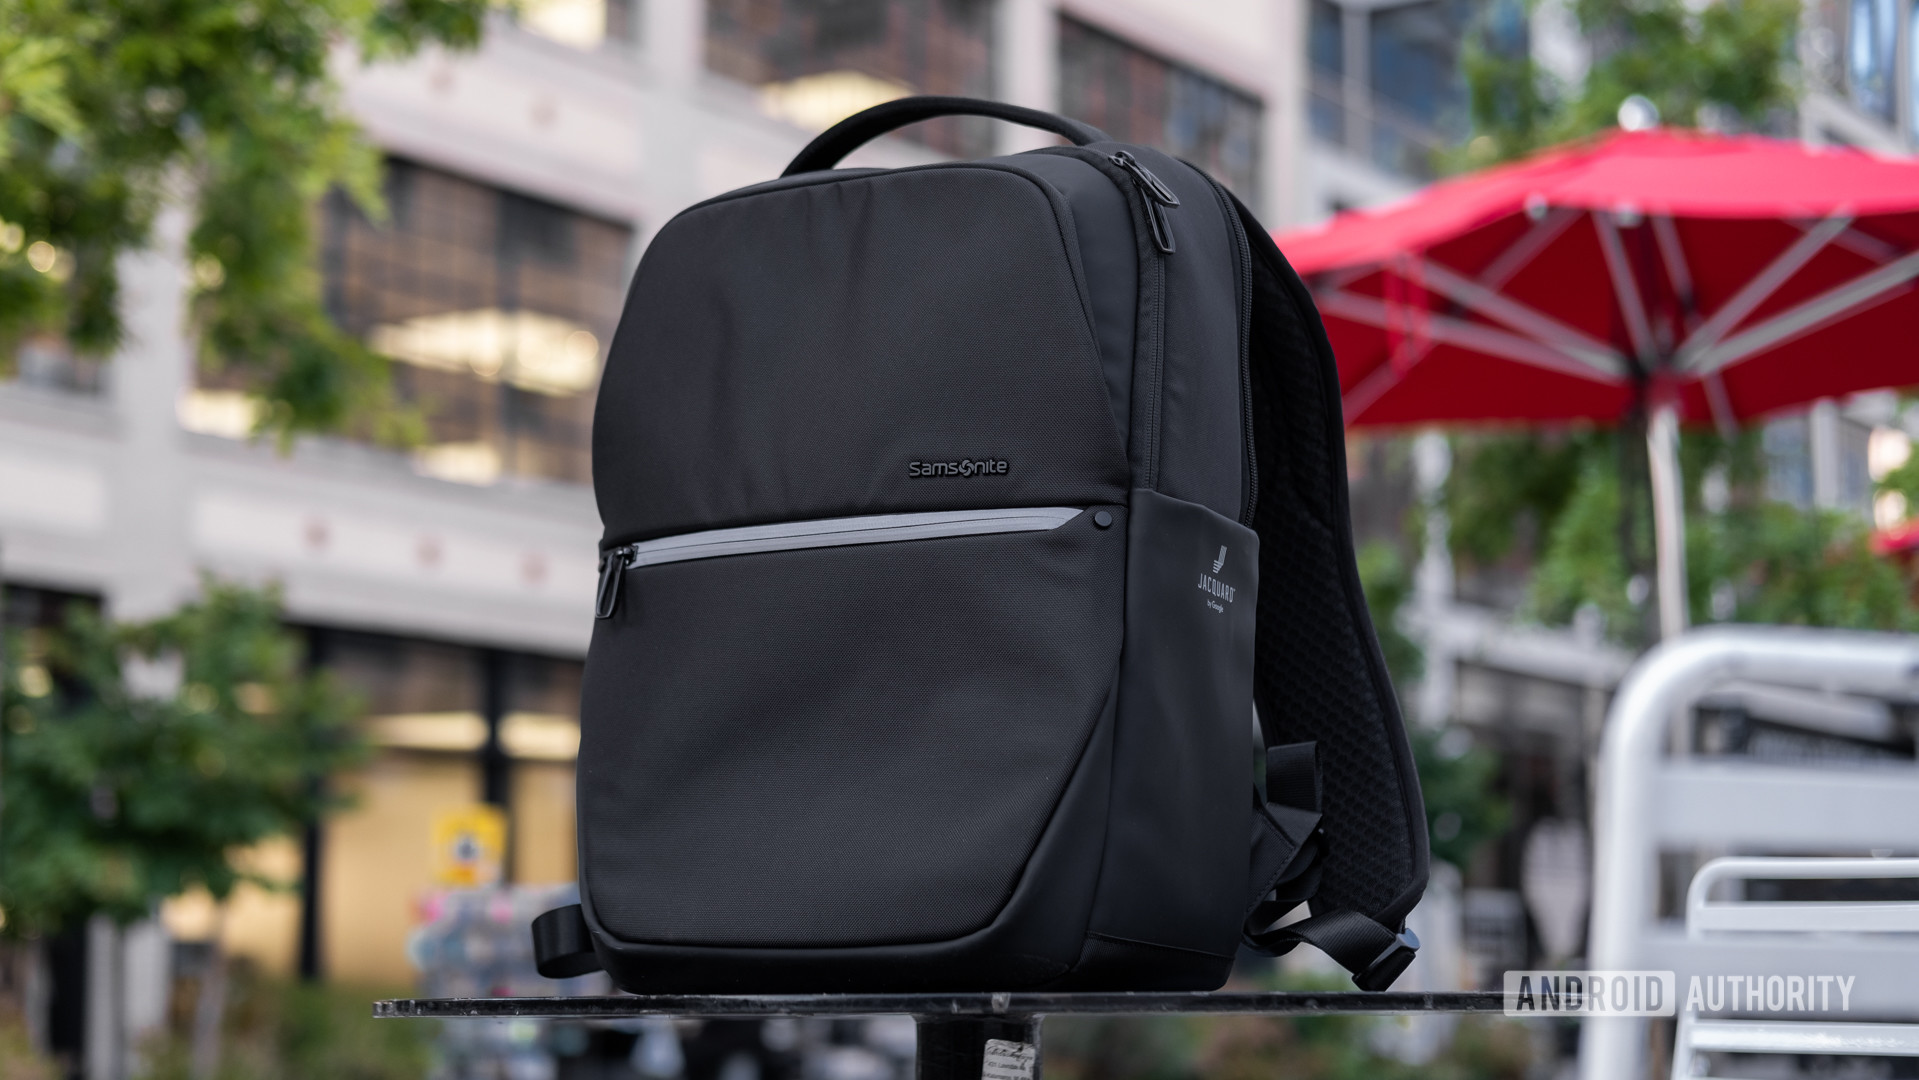 Google teams up with Samsonite to launch a Jacquard smart fabric